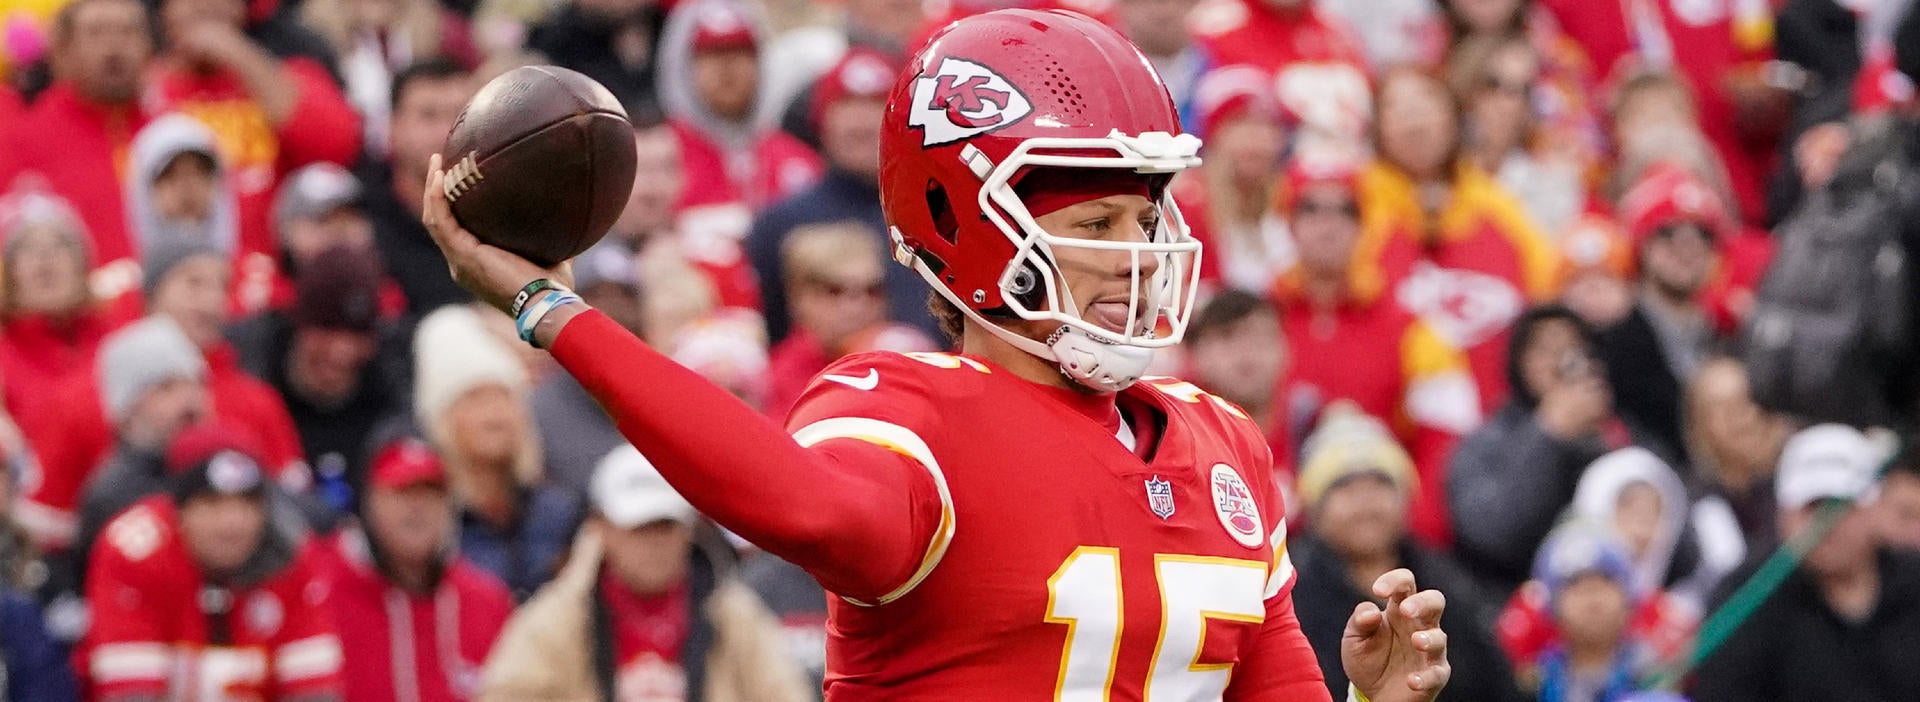 Bengals-Chiefs, 49ers-Eagles picks: Best bets and 10-1 parlay from Larry Hartstein for conference championships